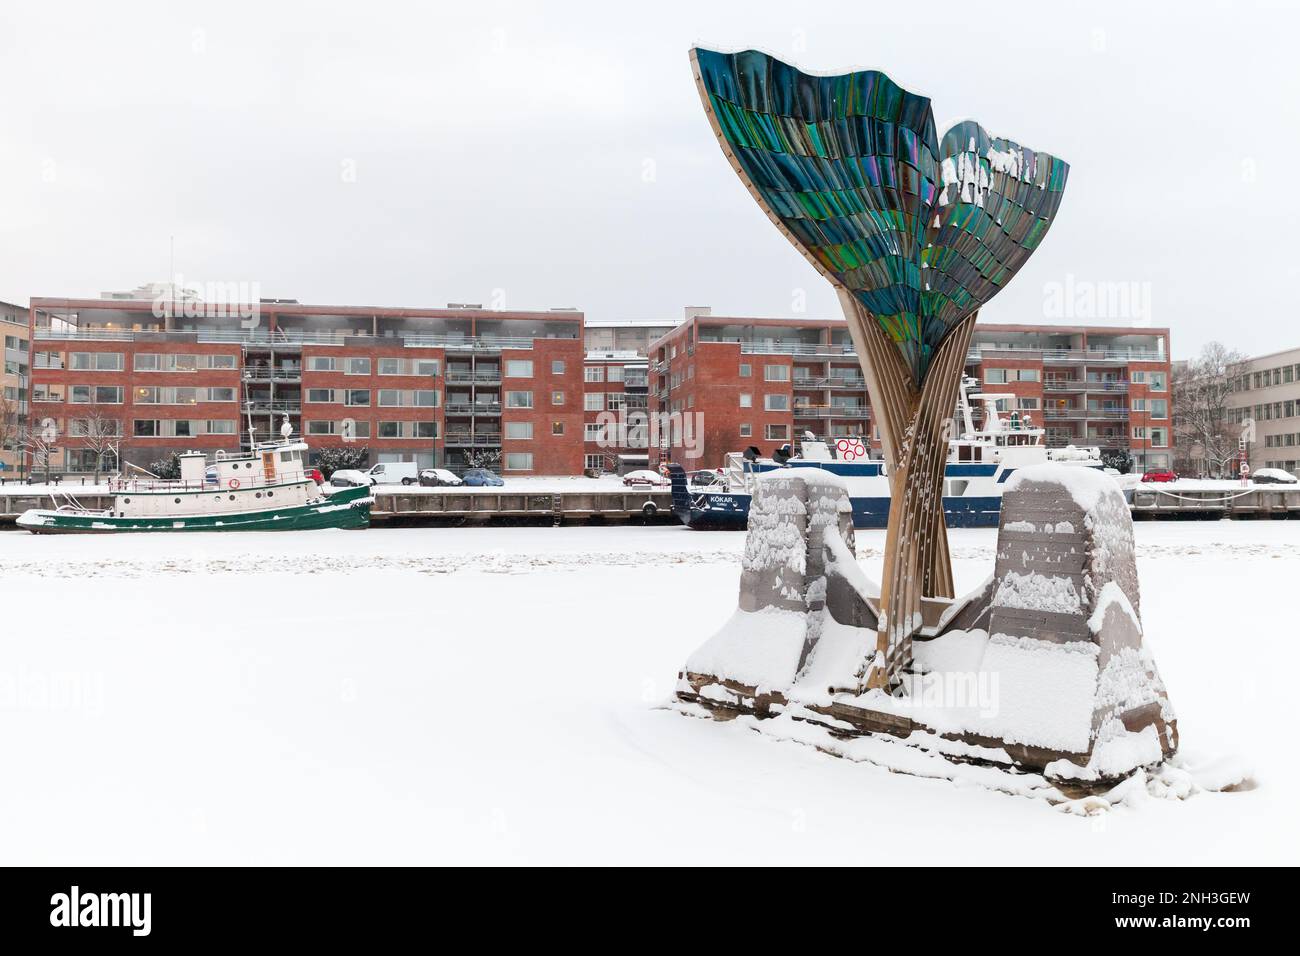 Turku, Finland - January 17, 2016: Harmonia or Harmony fountain sculpture by Achim Kuhn on a winter day. It is located in the Aura River Stock Photo